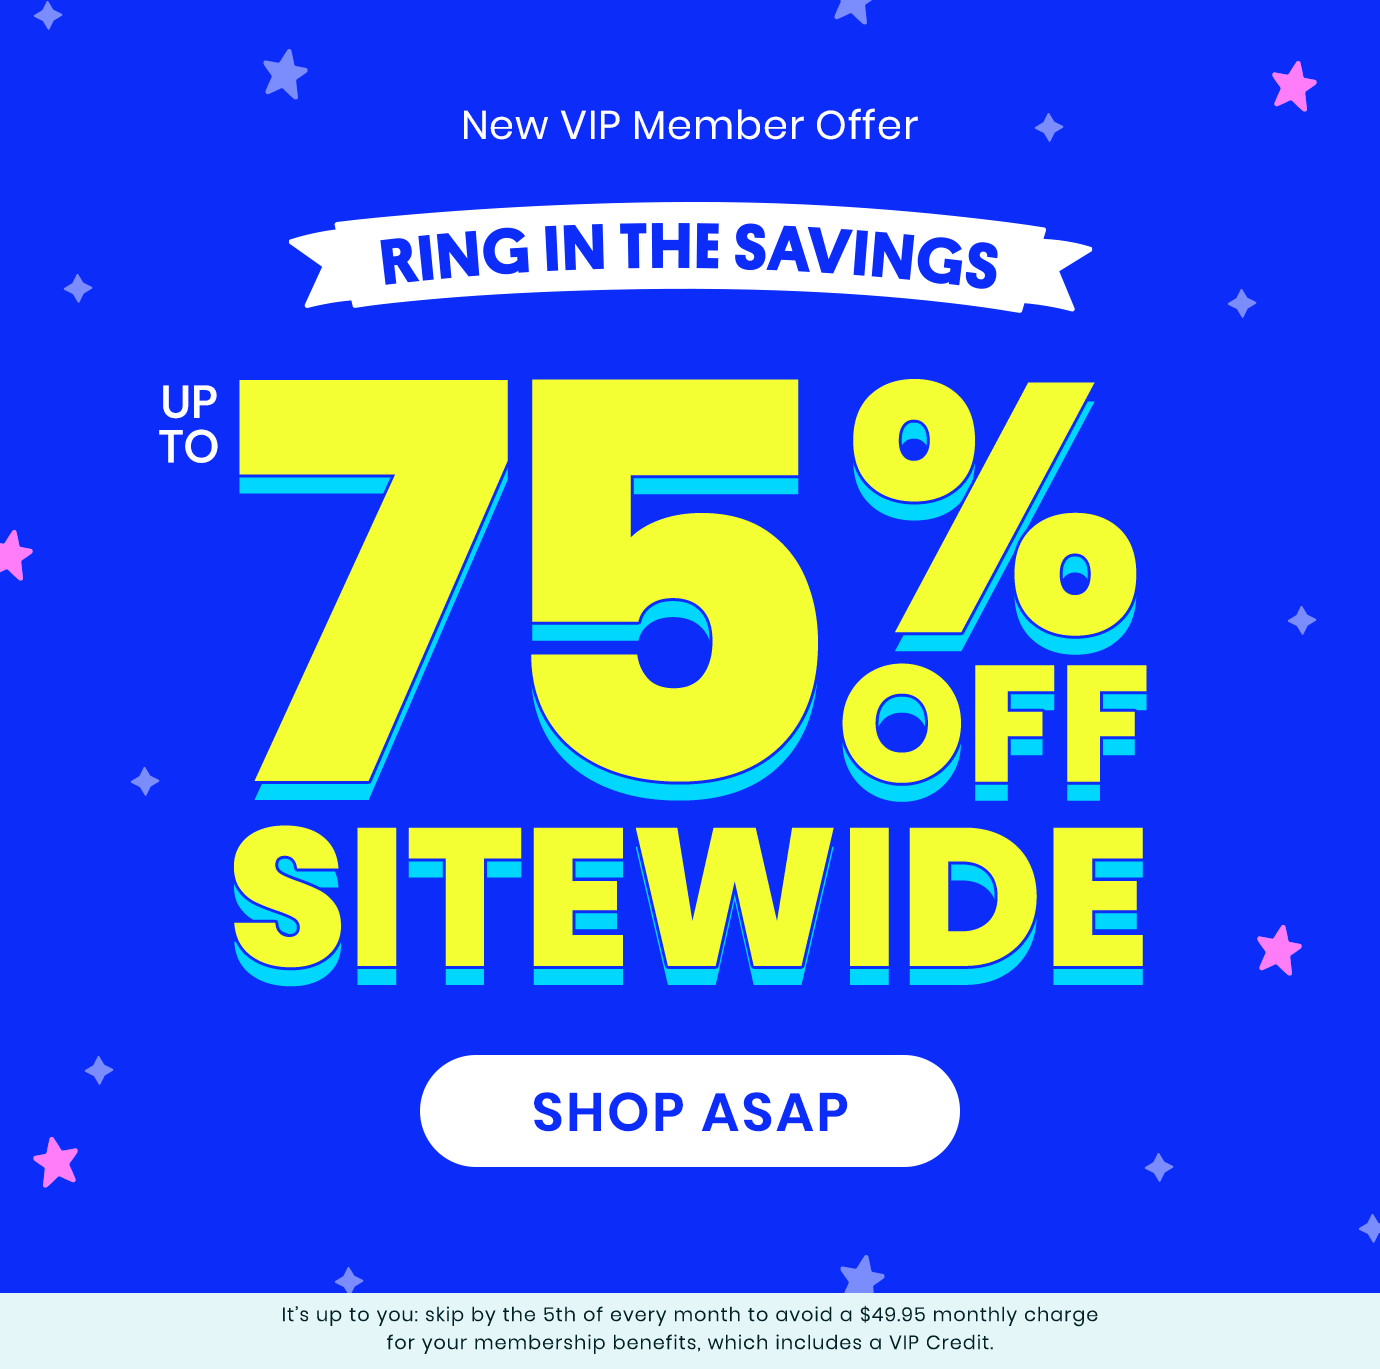 Up to 75% off Sitewide